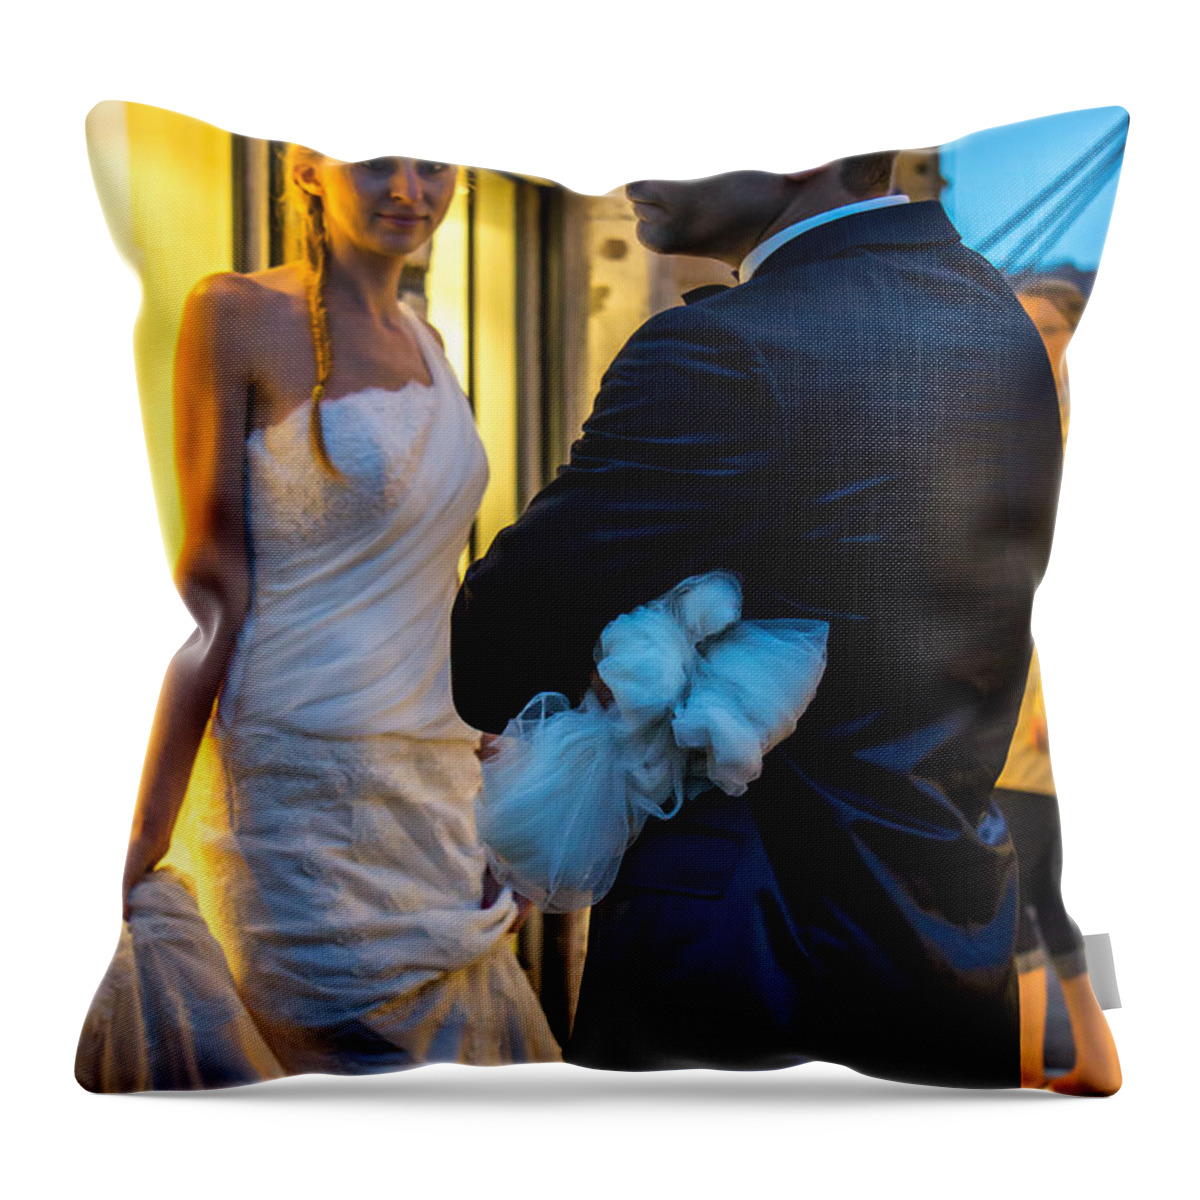 Venice Throw Pillow featuring the photograph Bride and Groom by Weir Here And There